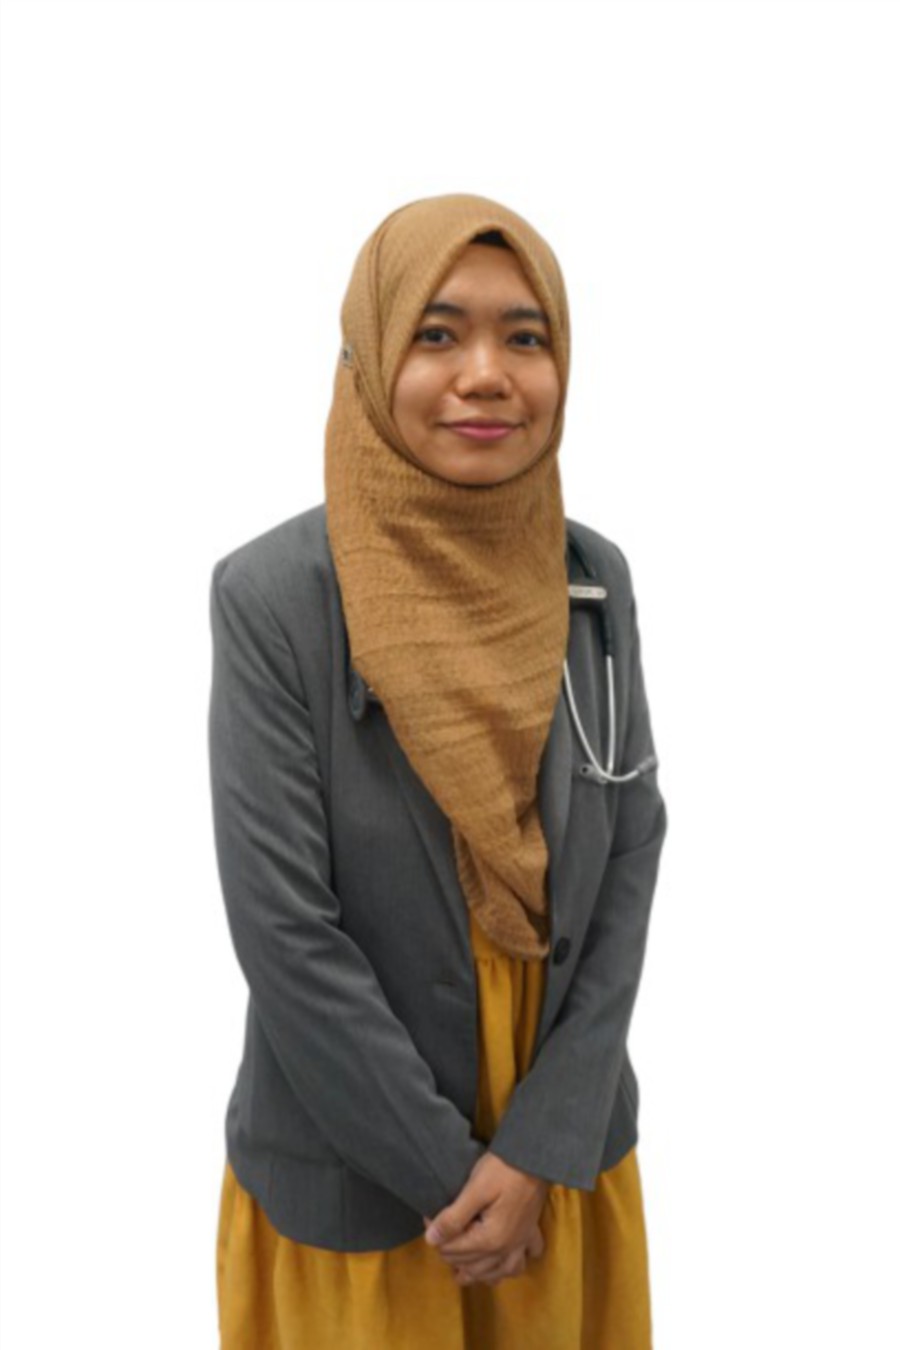 Dr Nurul says breathlessness caused by lung conditions may be a sign of acute or chronic diseases.